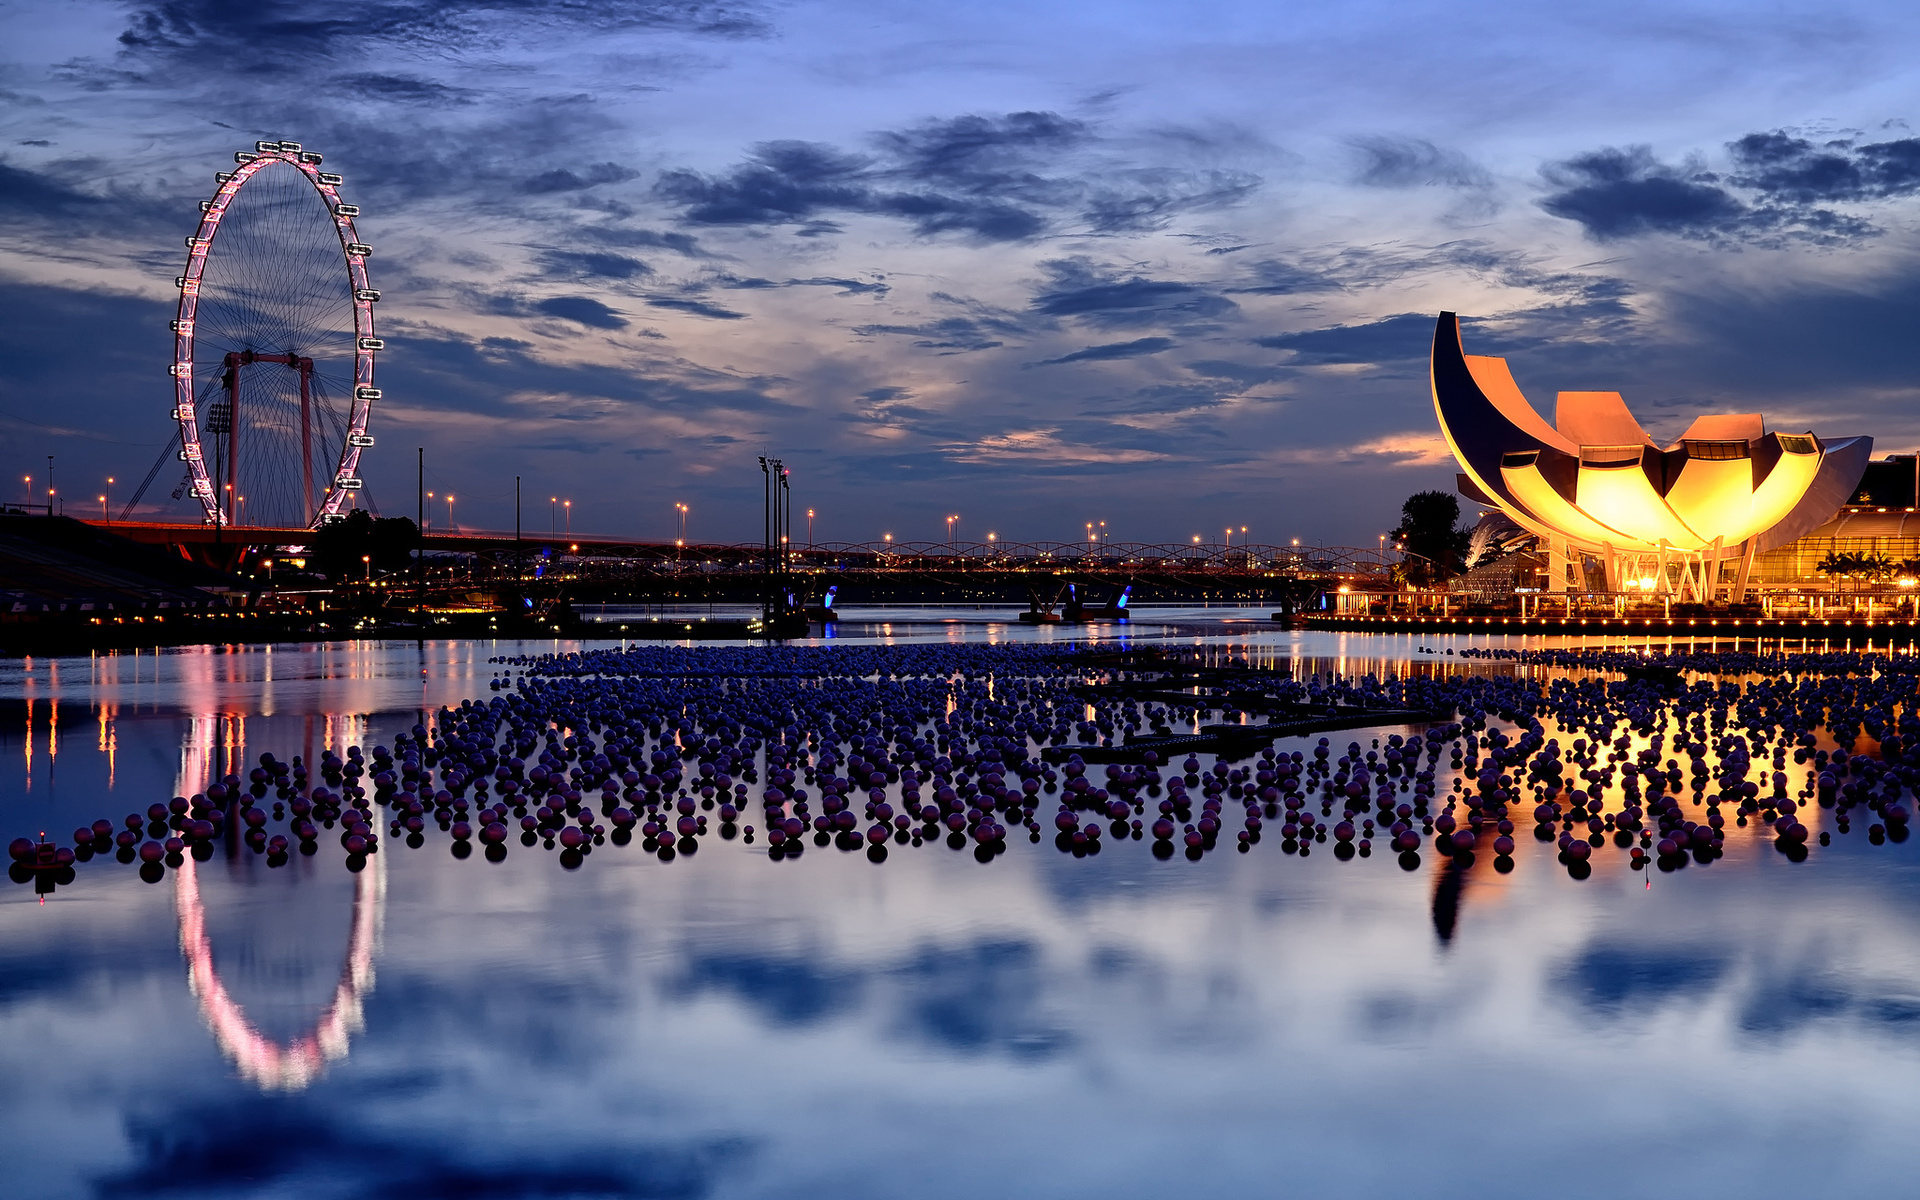 singapore, Amusement, Park, Hdr, Night, Lights, Architecture, Buildings, Water, Marina, Reflection, Sky, Clouds Wallpaper